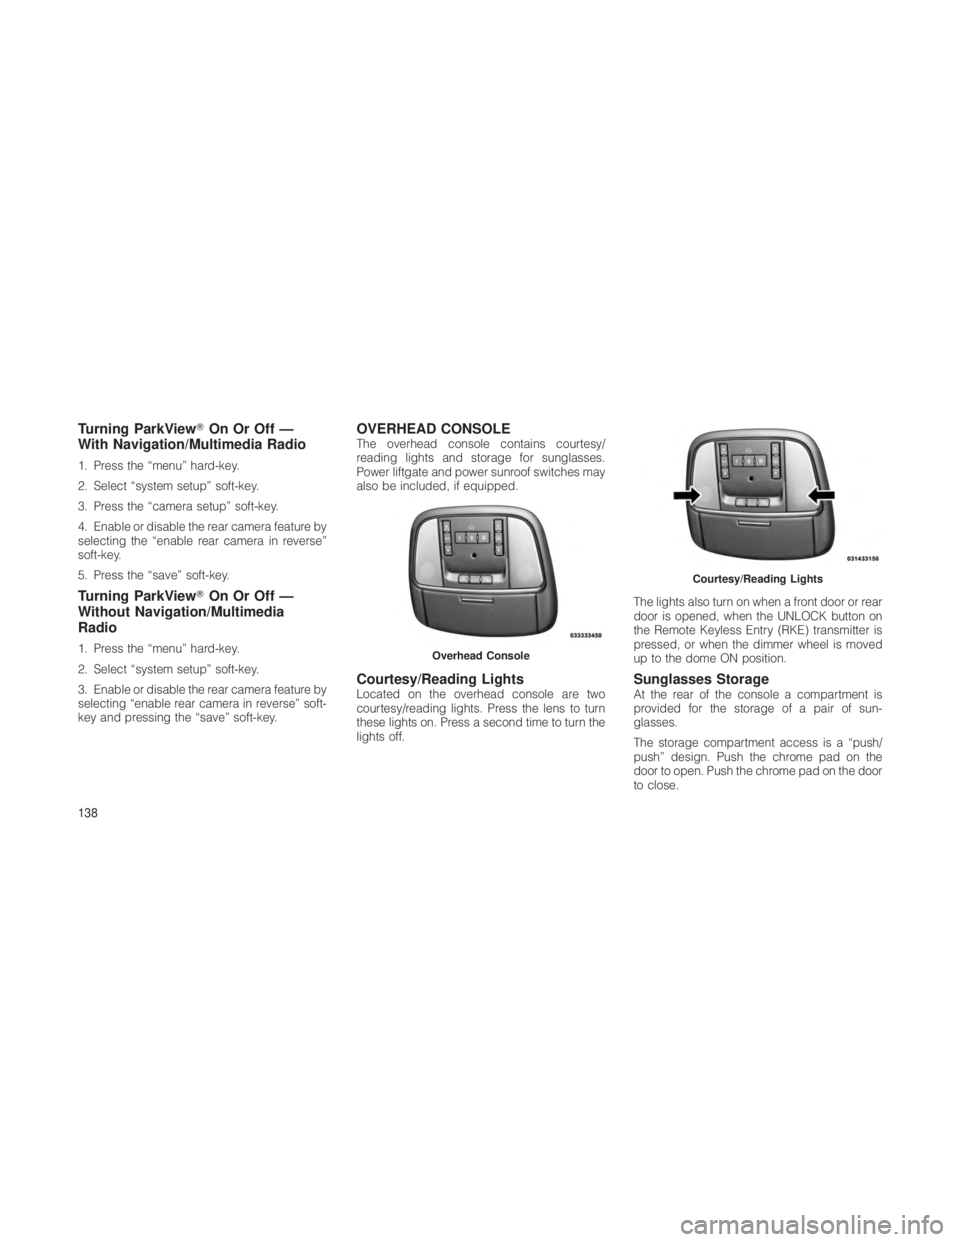 JEEP GRAND CHEROKEE 2012  Owner handbook (in English) Turning ParkViewOn Or Off —
With Navigation/Multimedia Radio
1. Press the “menu” hard-key.
2. Select “system setup” soft-key.
3. Press the “camera setup” soft-key.
4. Enable or disable 